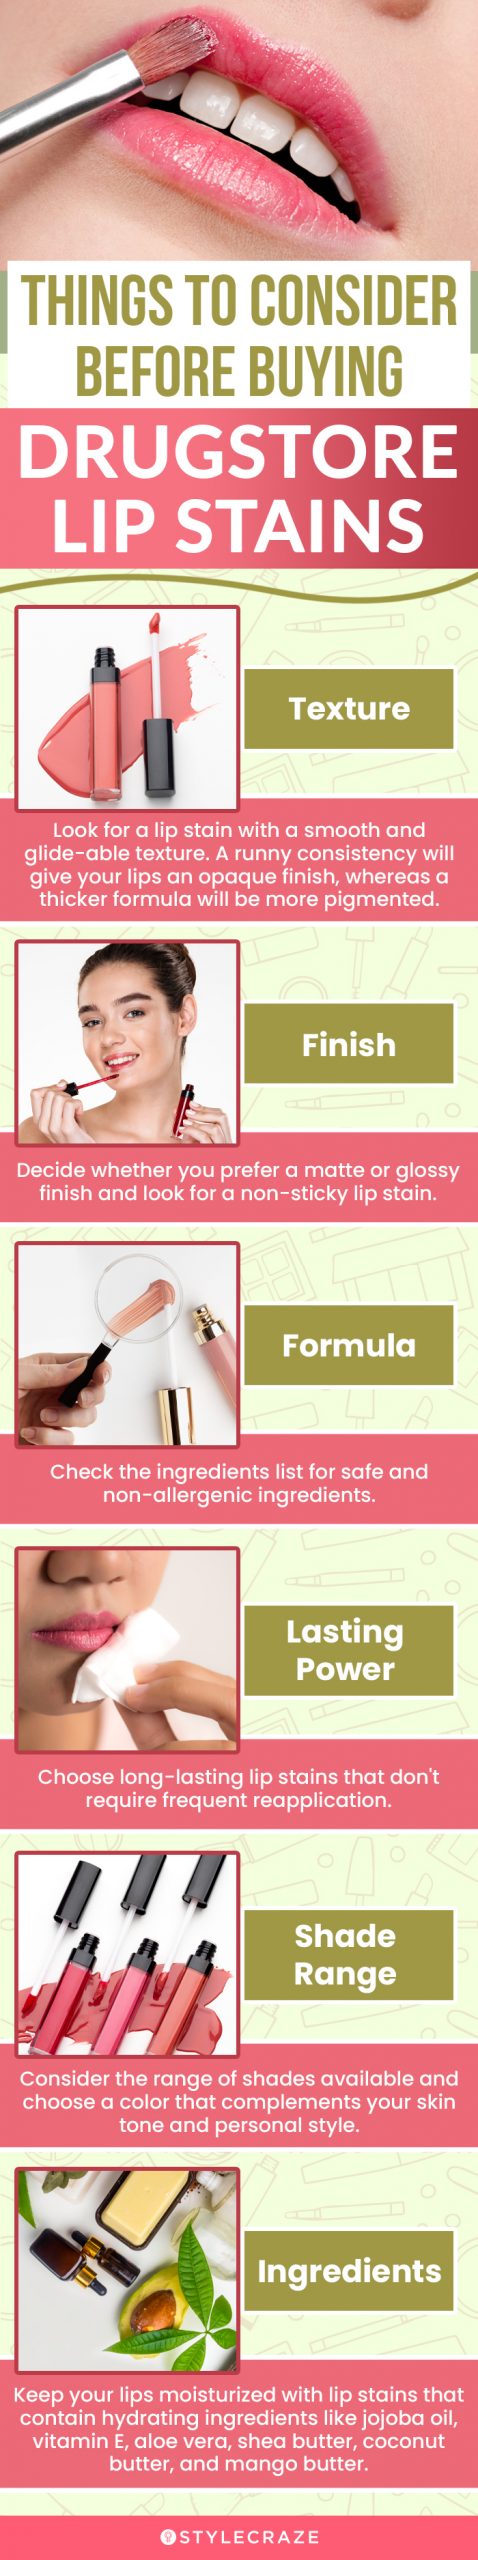 Things To Consider Before Buying Drugstore Lip Stains (infographic)